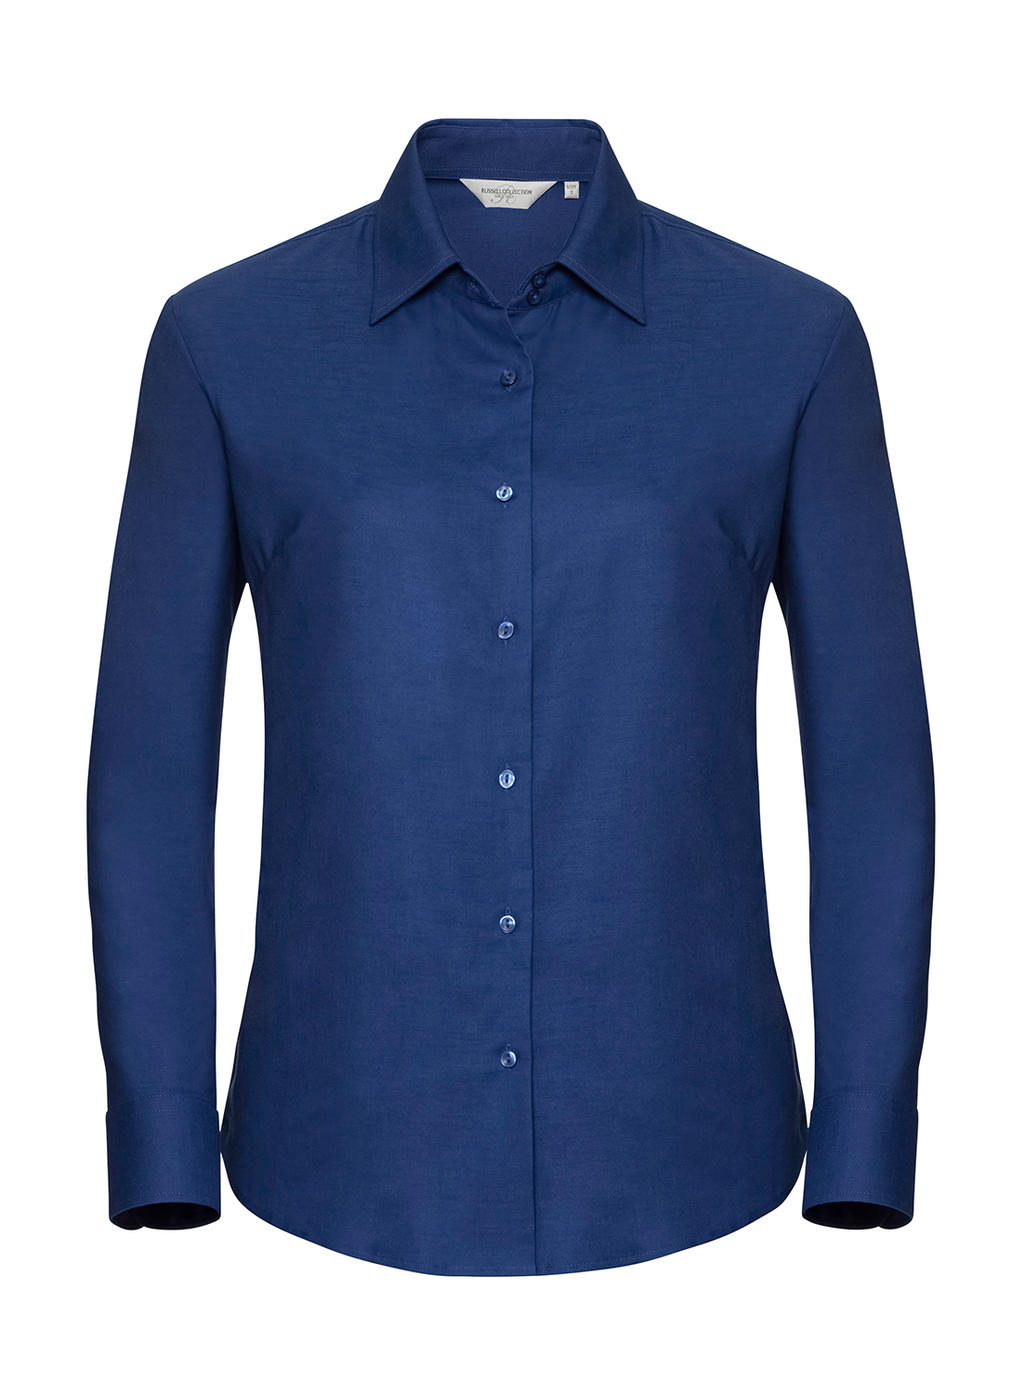  Ladies Classic Oxford Shirt LS in Farbe Bright Royal